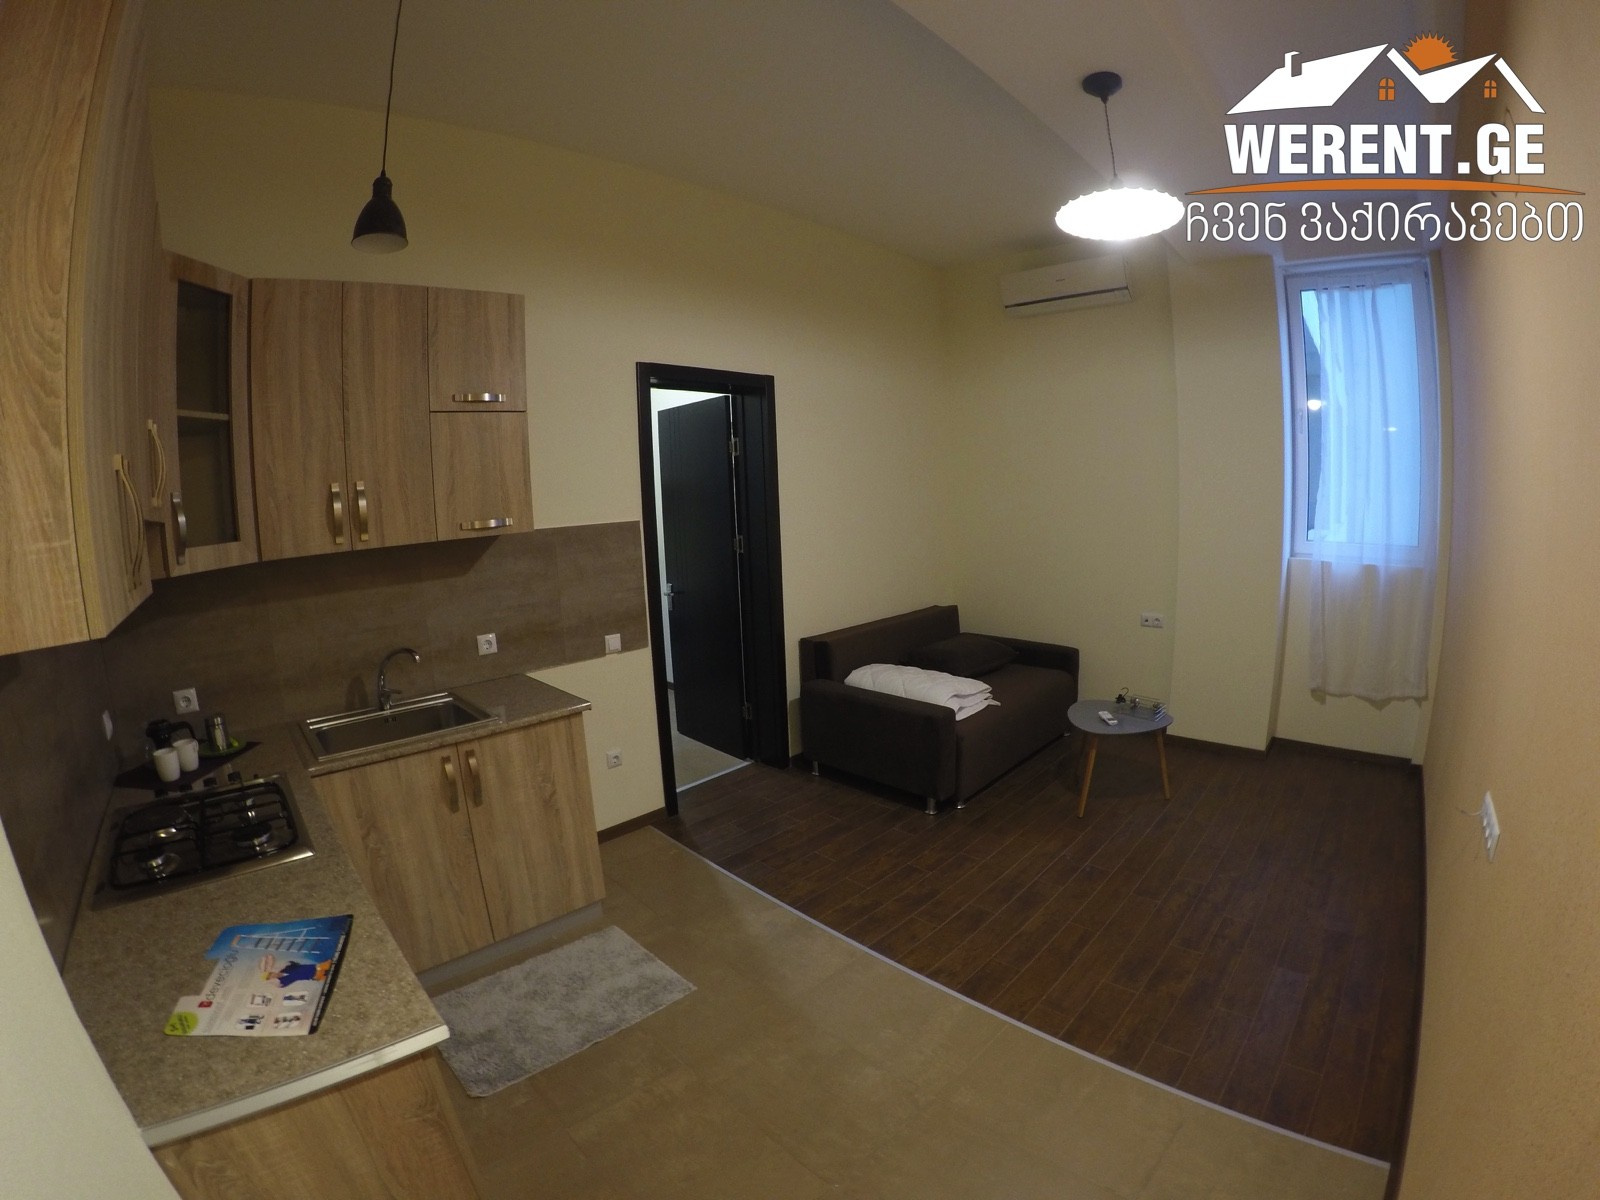 1 Room Apartment For Rent At Axis at Abashidze st. Tbilisi